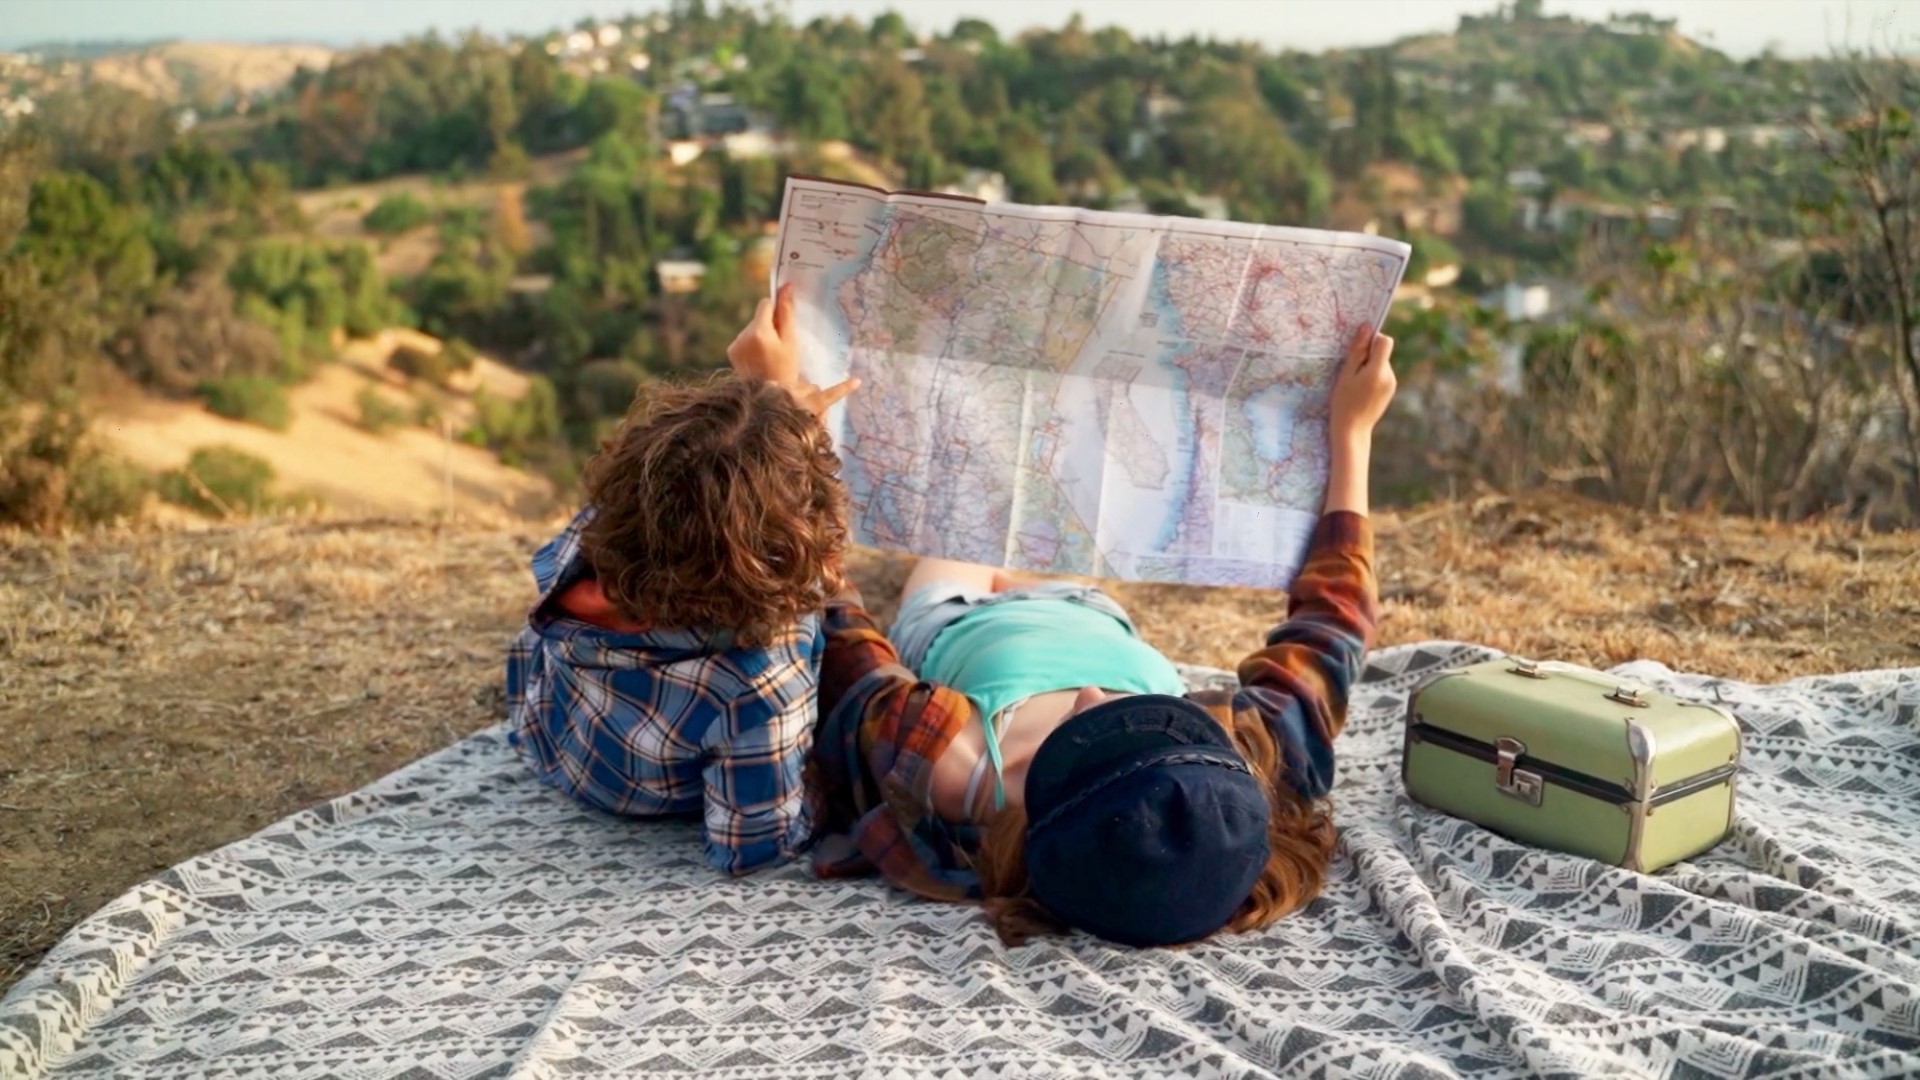 A new study conducted by OnePoll on behalf of Little Passports found that expanding their horizons as children is what motivated participants to travel as adults. Buzz60's Johana Restrepo has more.